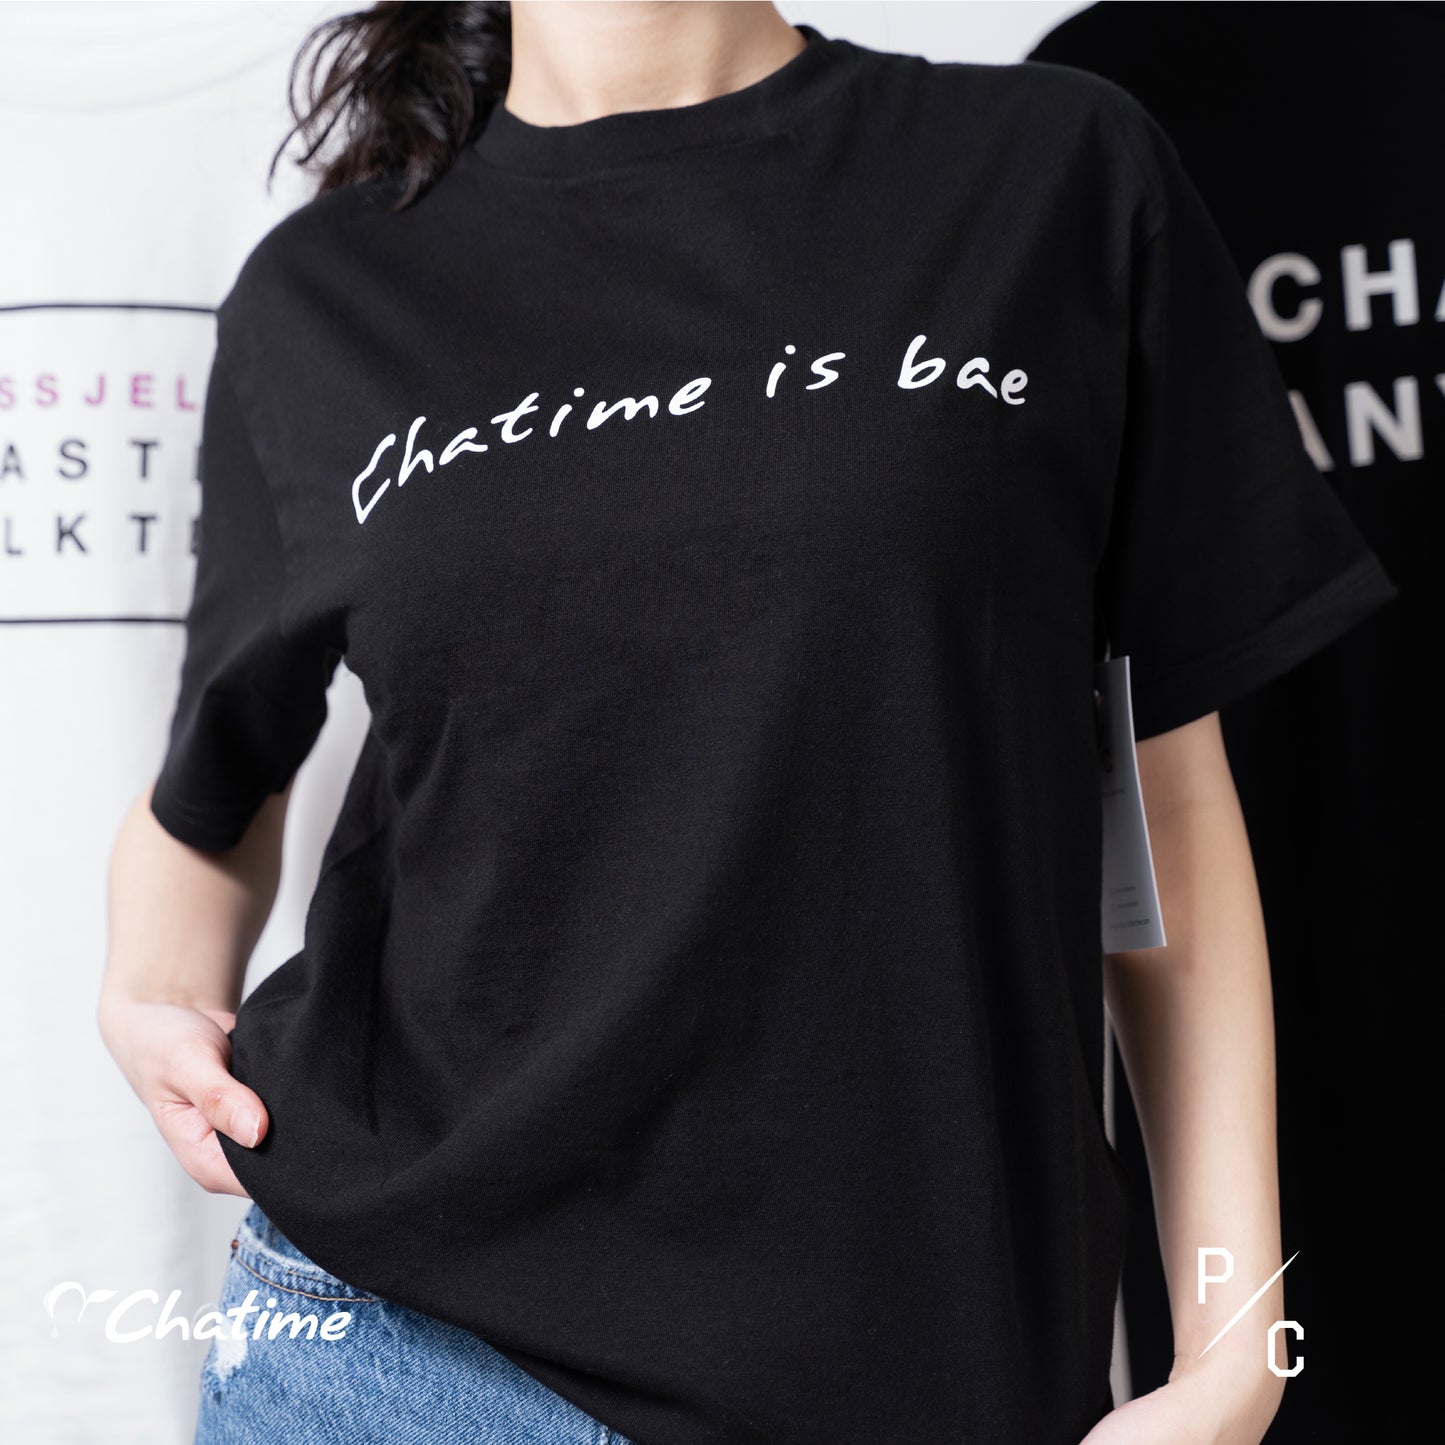 Chatime x Peace Collective Chatime is Bae T-shirt (Limited Edition)